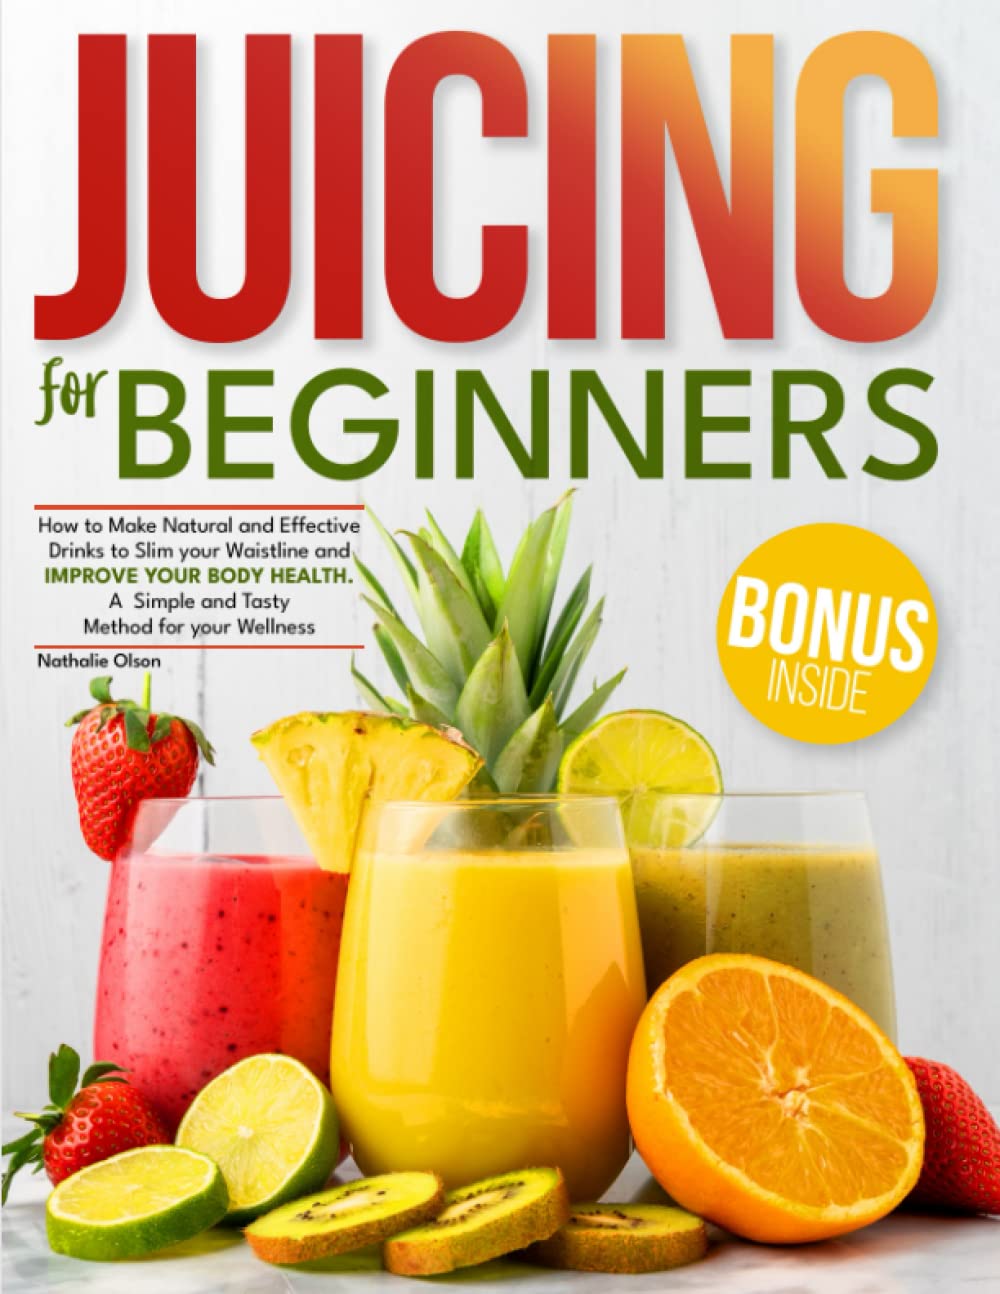 Juicing for Beginners: How to Make Natural and Effective Drinks to Slim your Waistline and Improve Your Body Health | A Simple and Tasty Method for your Wellness